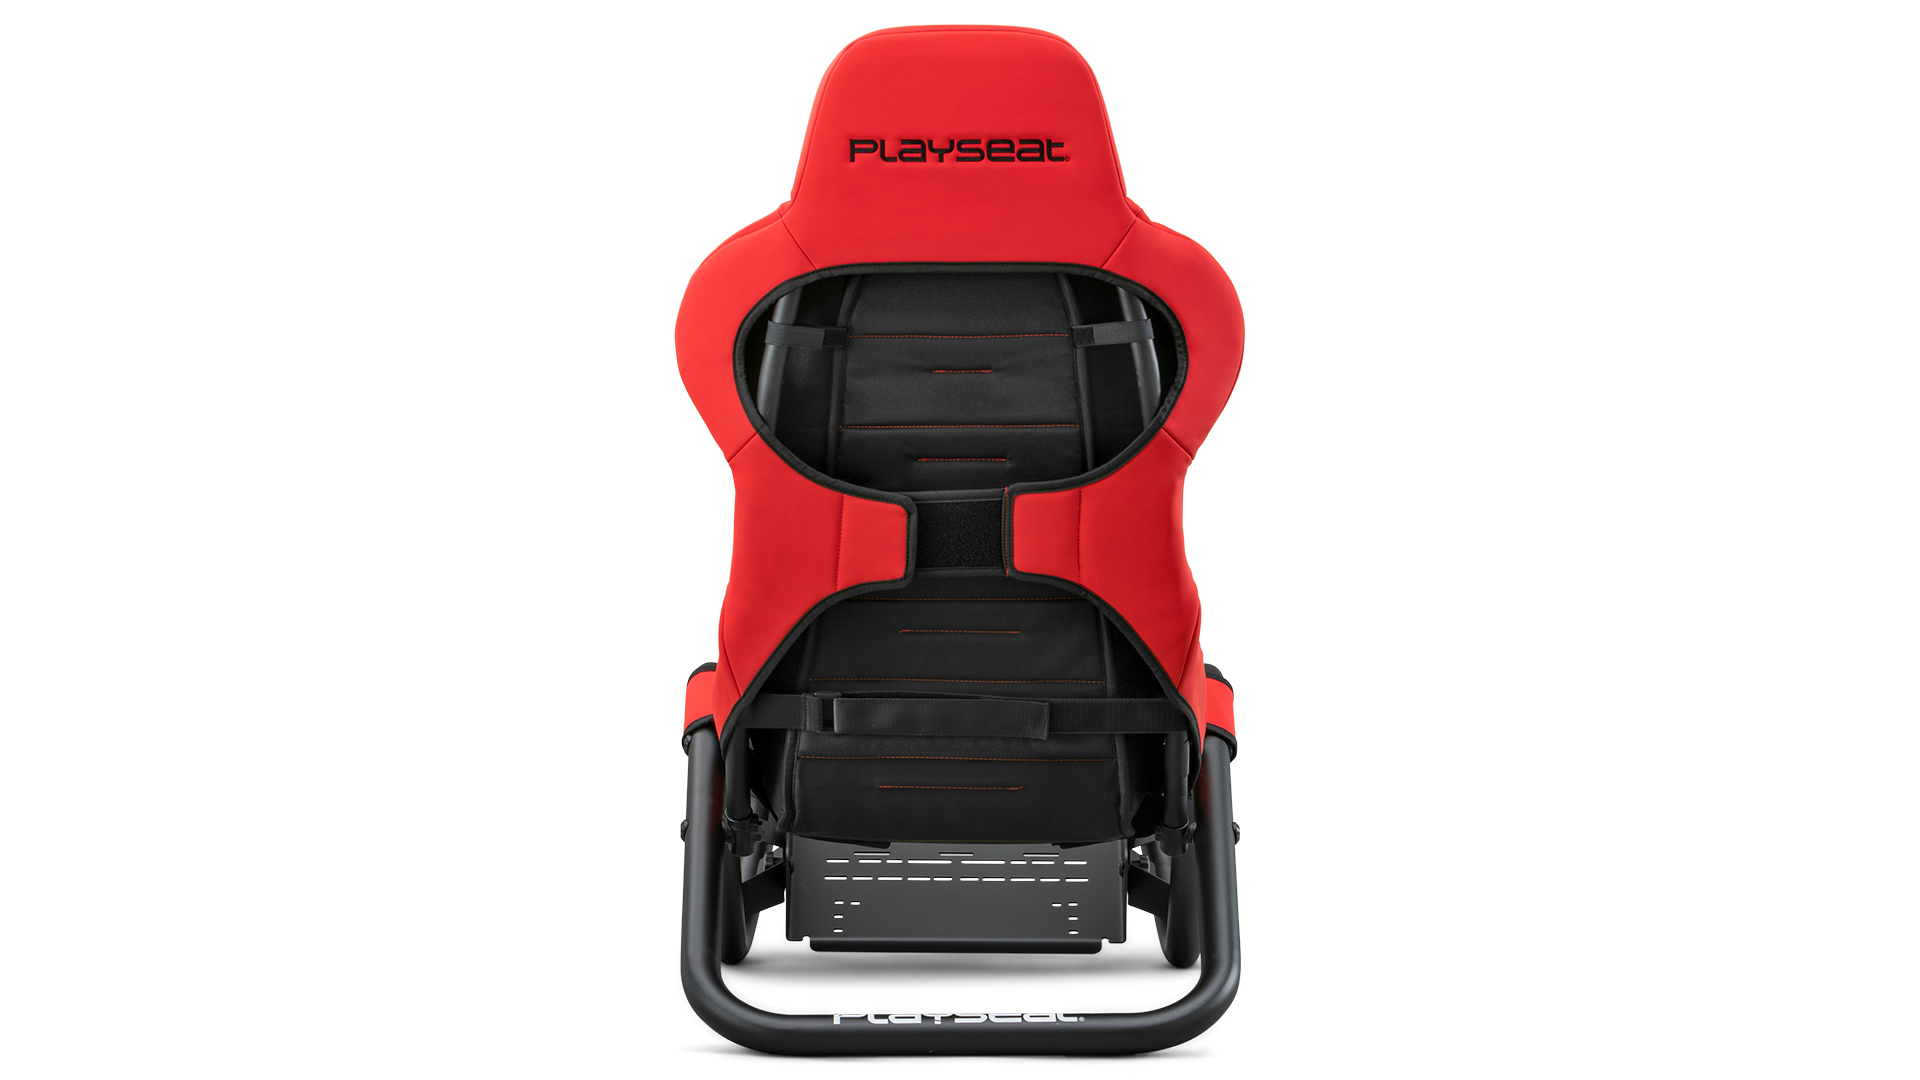 playseat-trophy-red-direct-drive-simulator-back-view-1920x1080-4.png